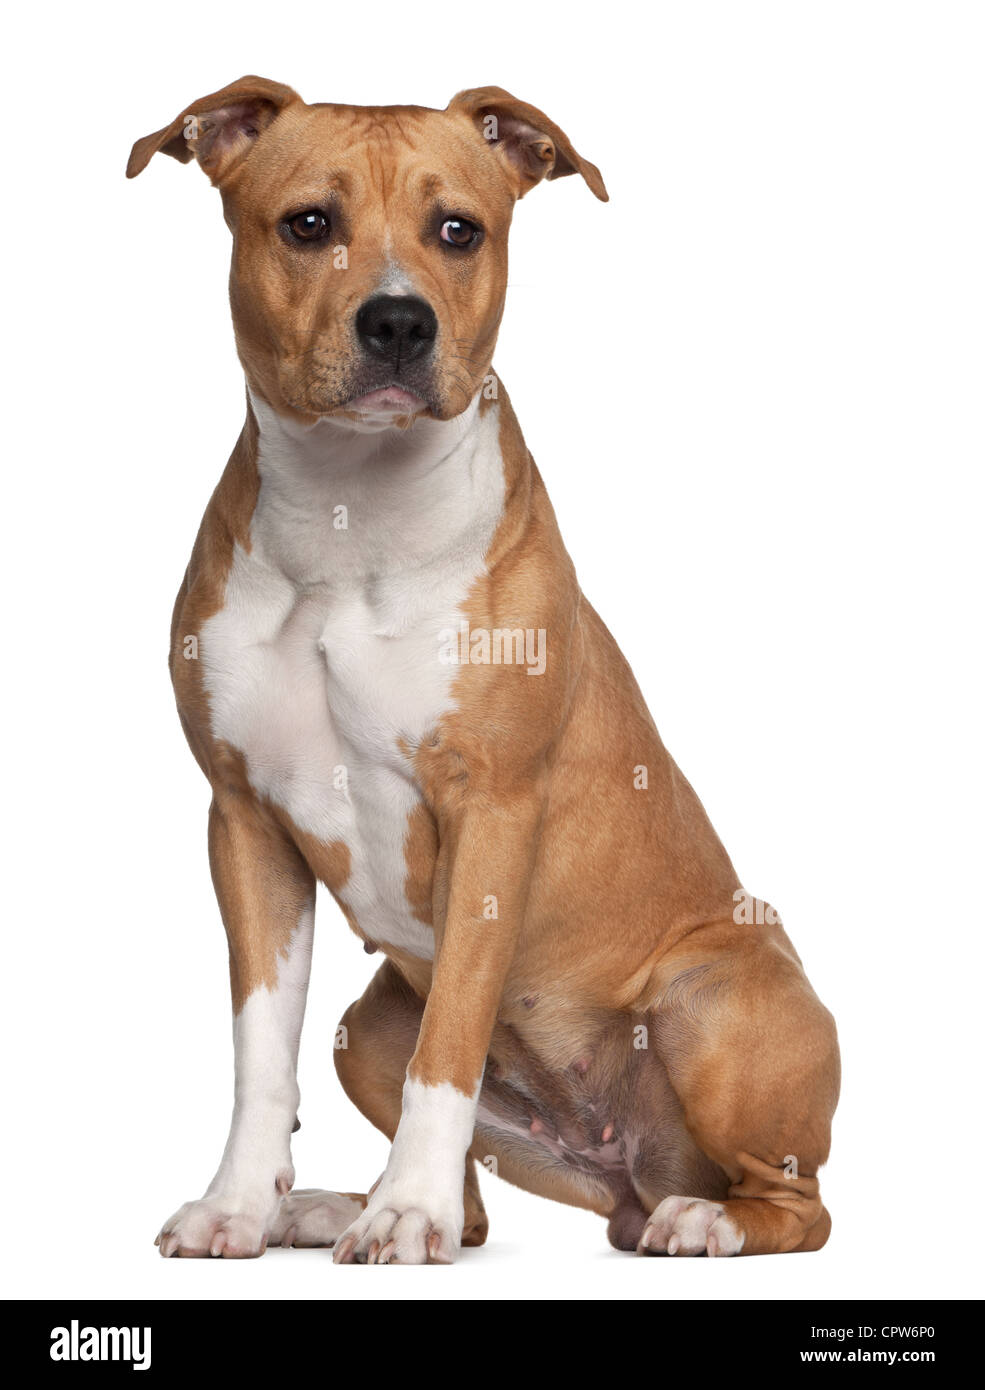 American Staffordshire Terrier, 8 months old, sitting against white background Stock Photo